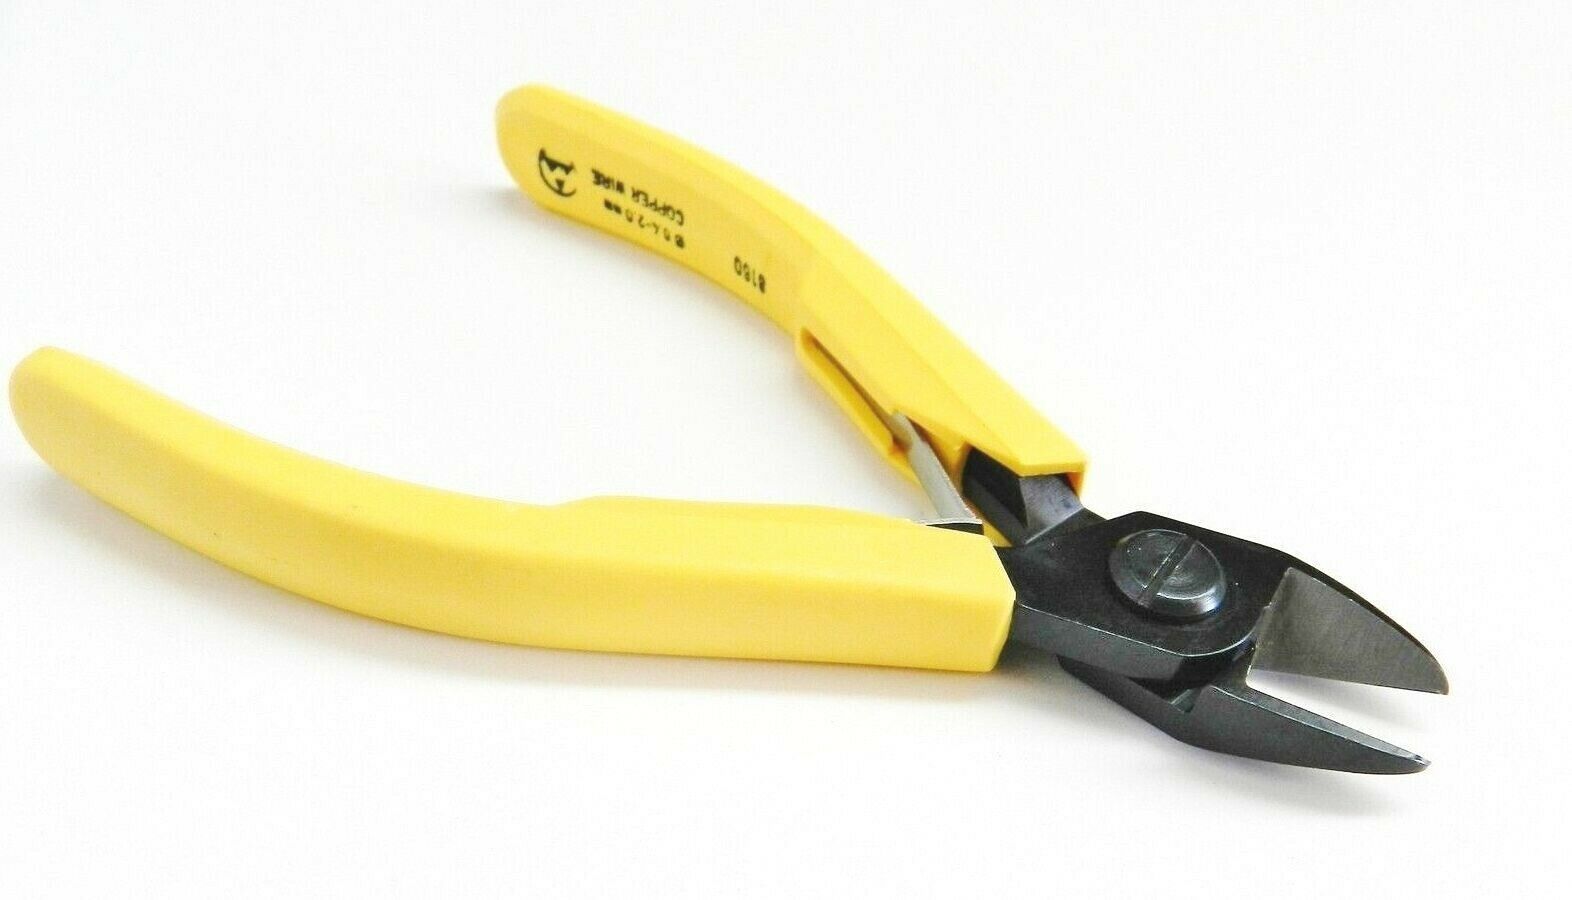 Lindstrom 8160 Cutter Precision Micro-bevel Cutting 80-series Oval Head Pliers